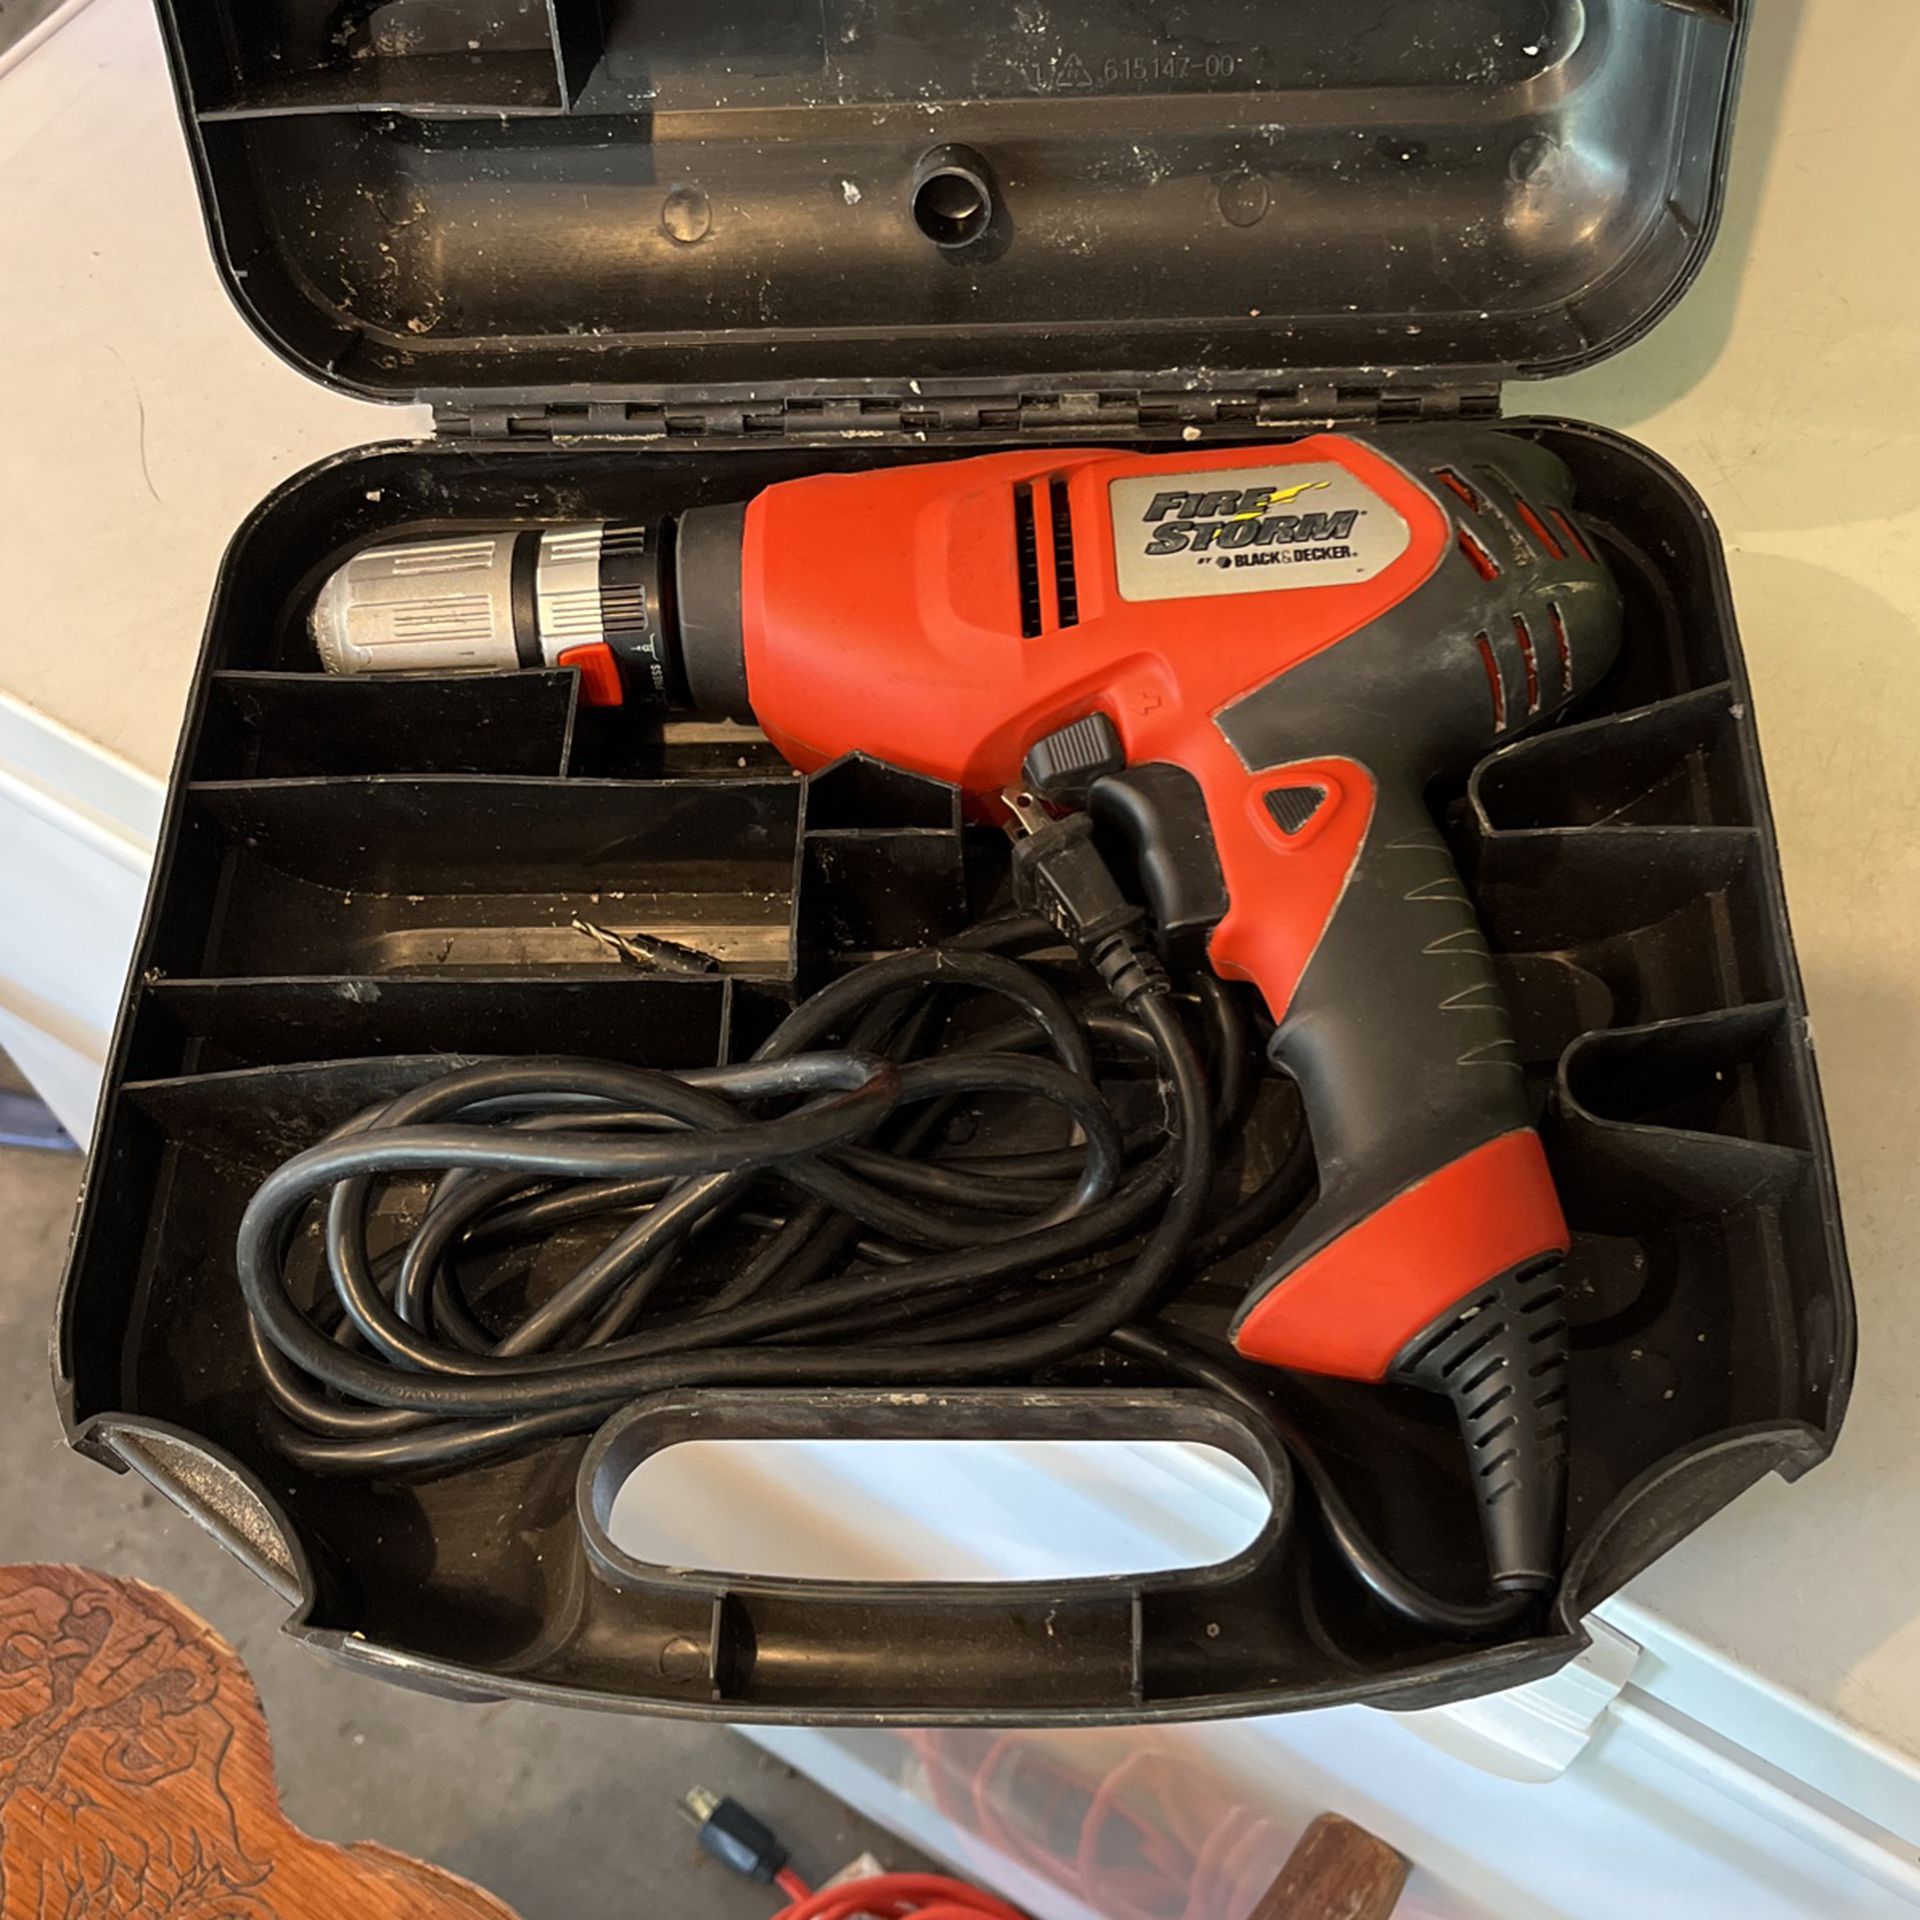 Black And Decker Firestorm Drill, Corded for Sale in Seattle, WA